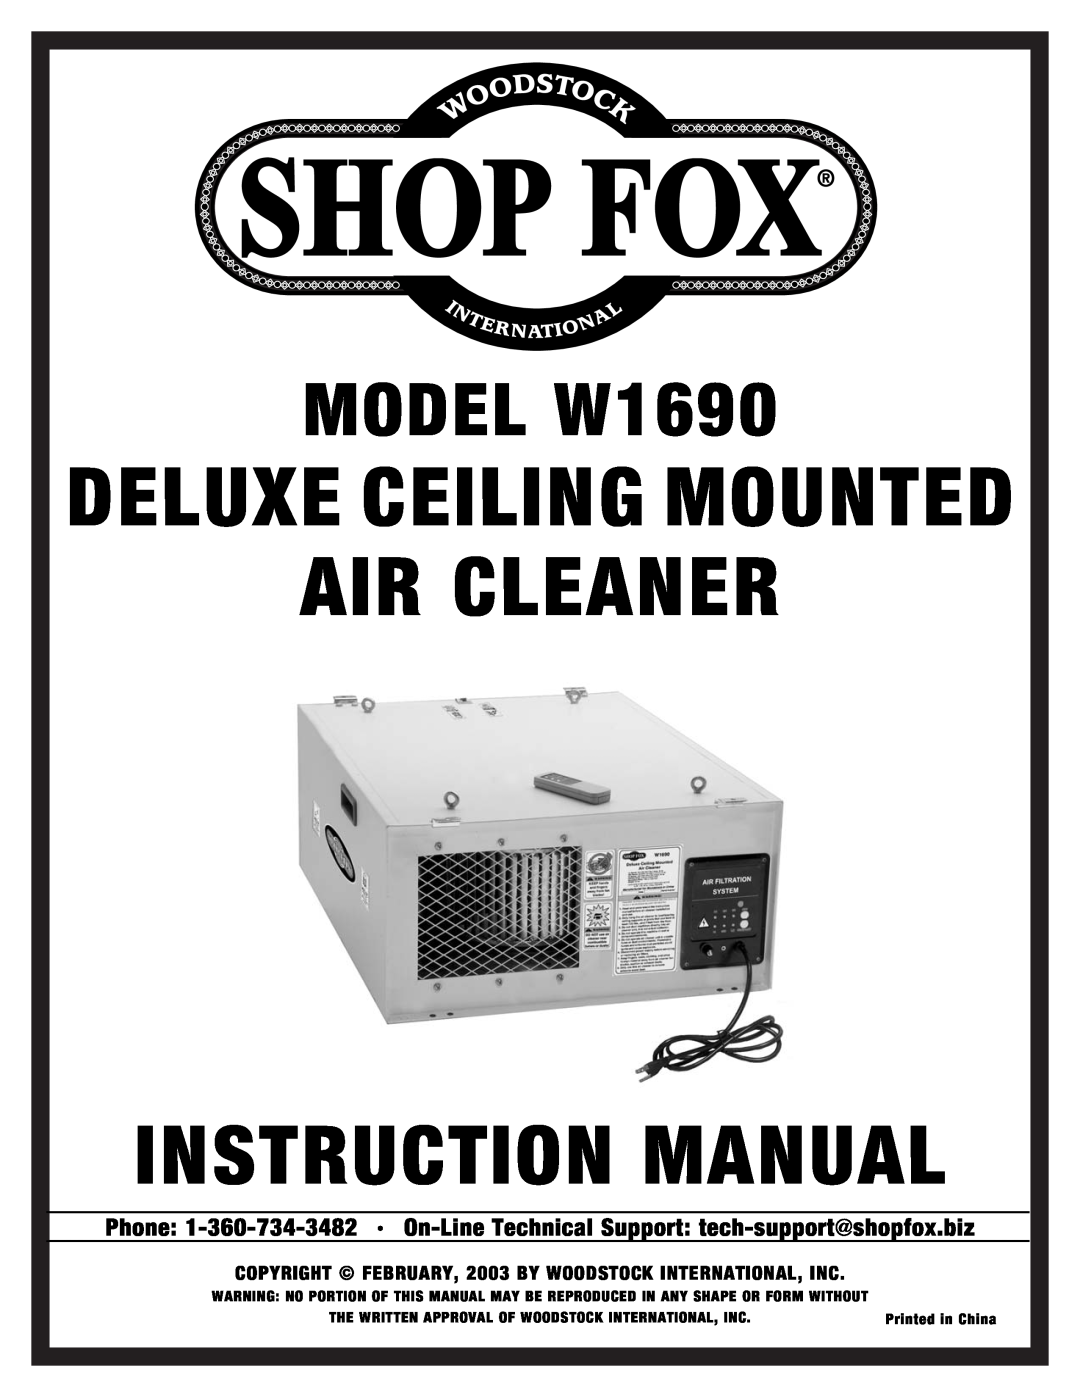 Woodstock instruction manual Air Cleaner, MODEL W1690, Deluxe Ceiling Mounted 